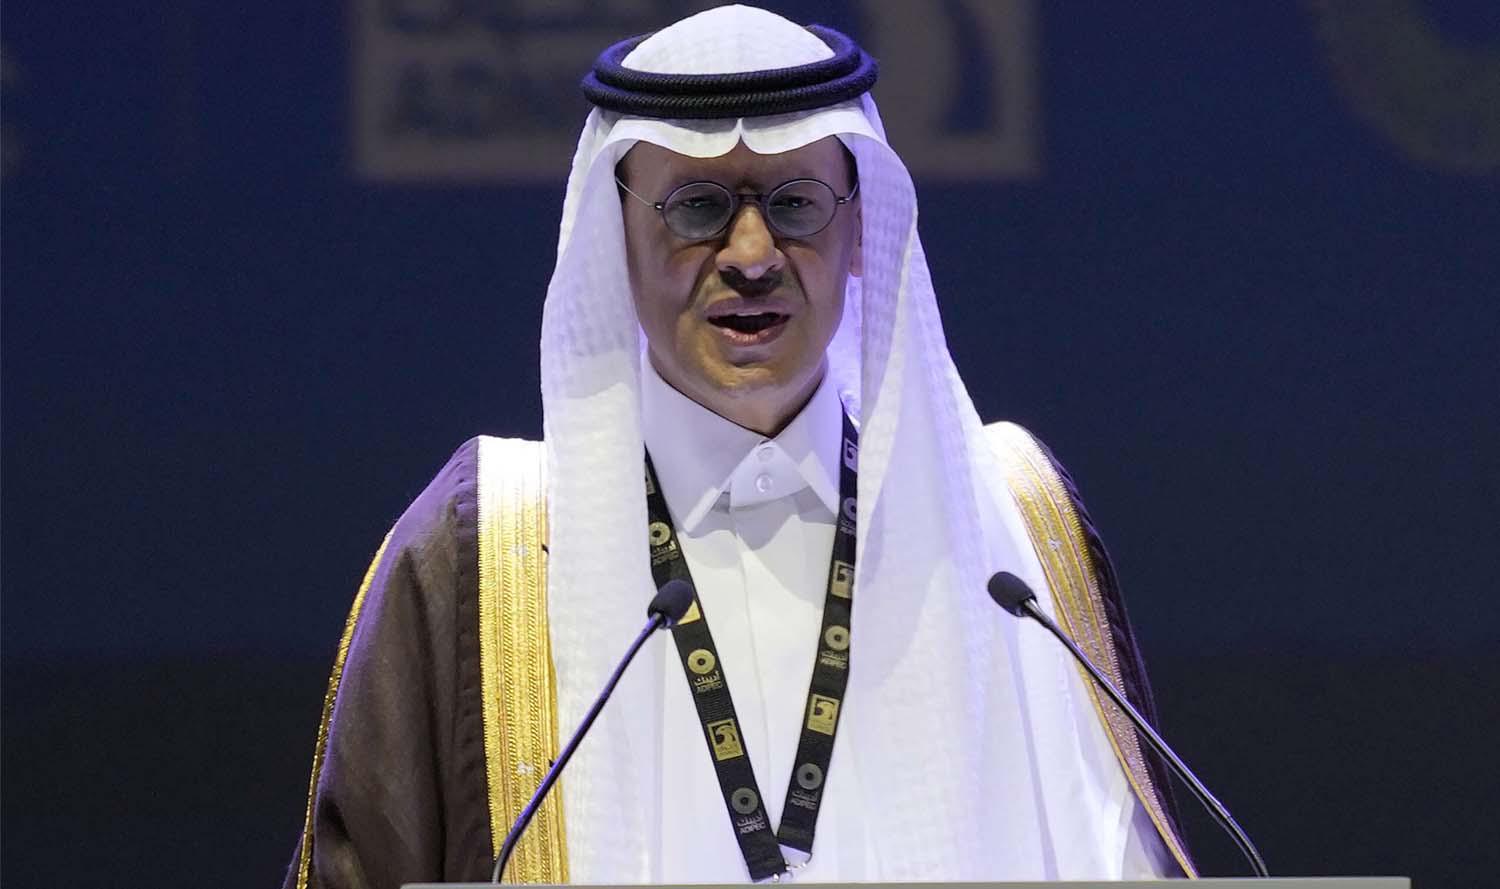 Prince Abdulaziz said Saudi Arabia is on track for delivering its carbon capture targets of 44 million tonnes by 2035